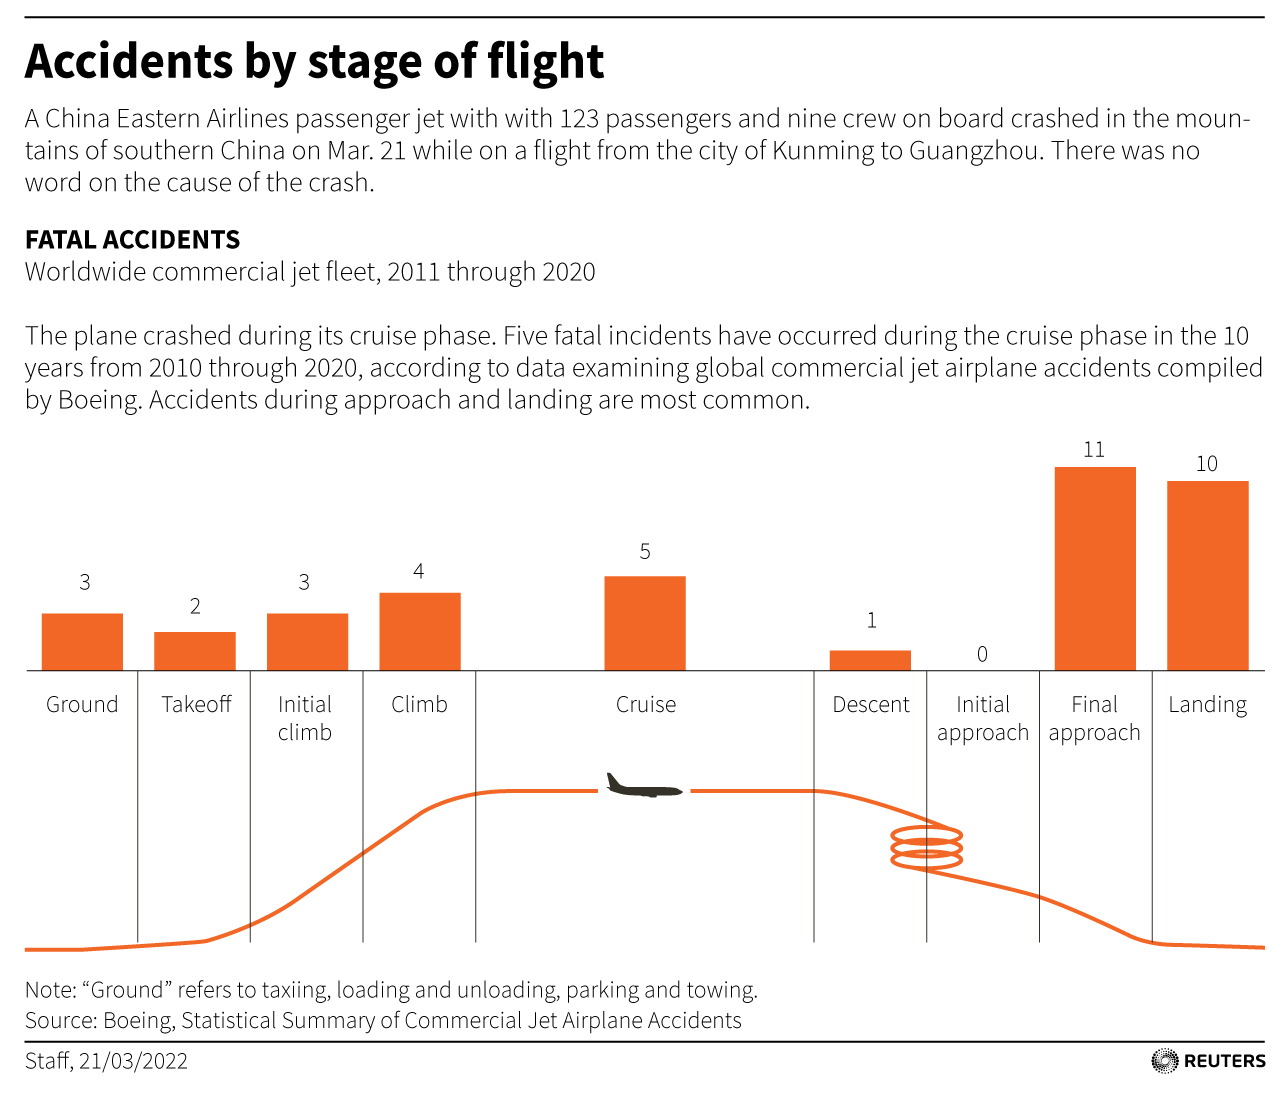 The plane crashed during its cruise phase. Five fatal incidents have occurred during the cruise phase in the 10 years from 2010 through 2020, according to data examining global commercial jet airplane accidents compiled by Boeing.